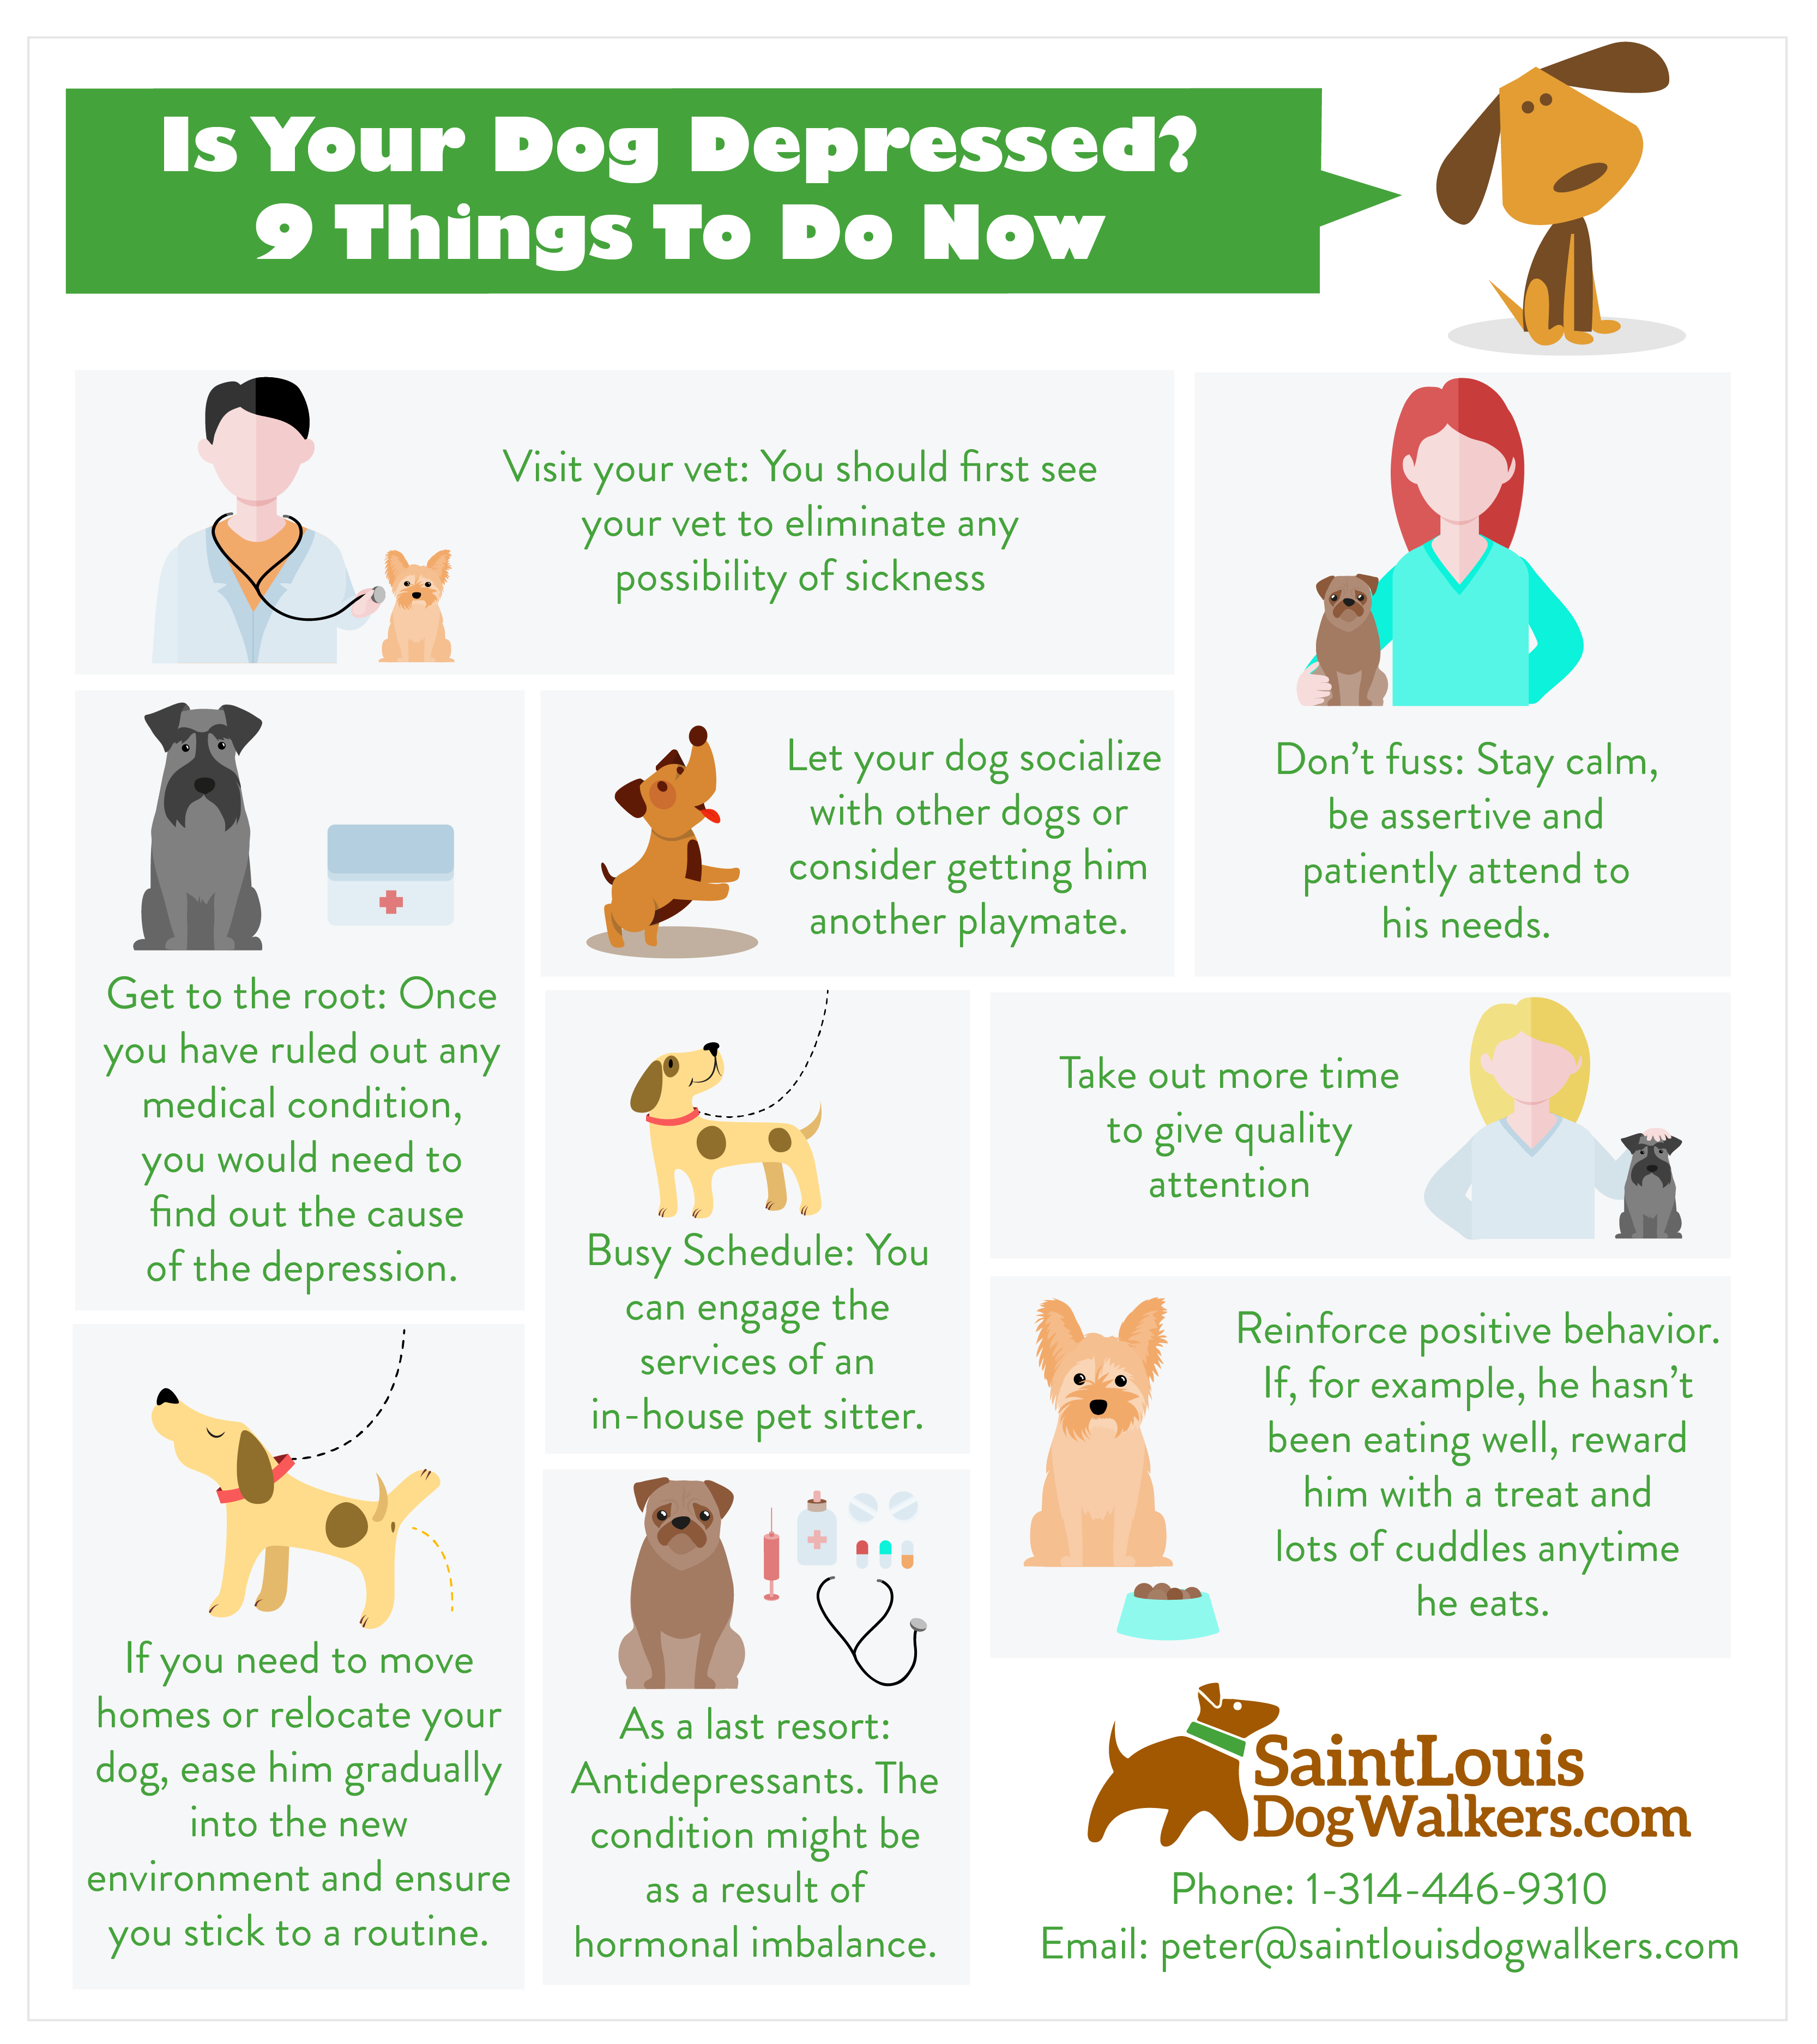 Is Your Dog Depressed? 8 Things to Do Now